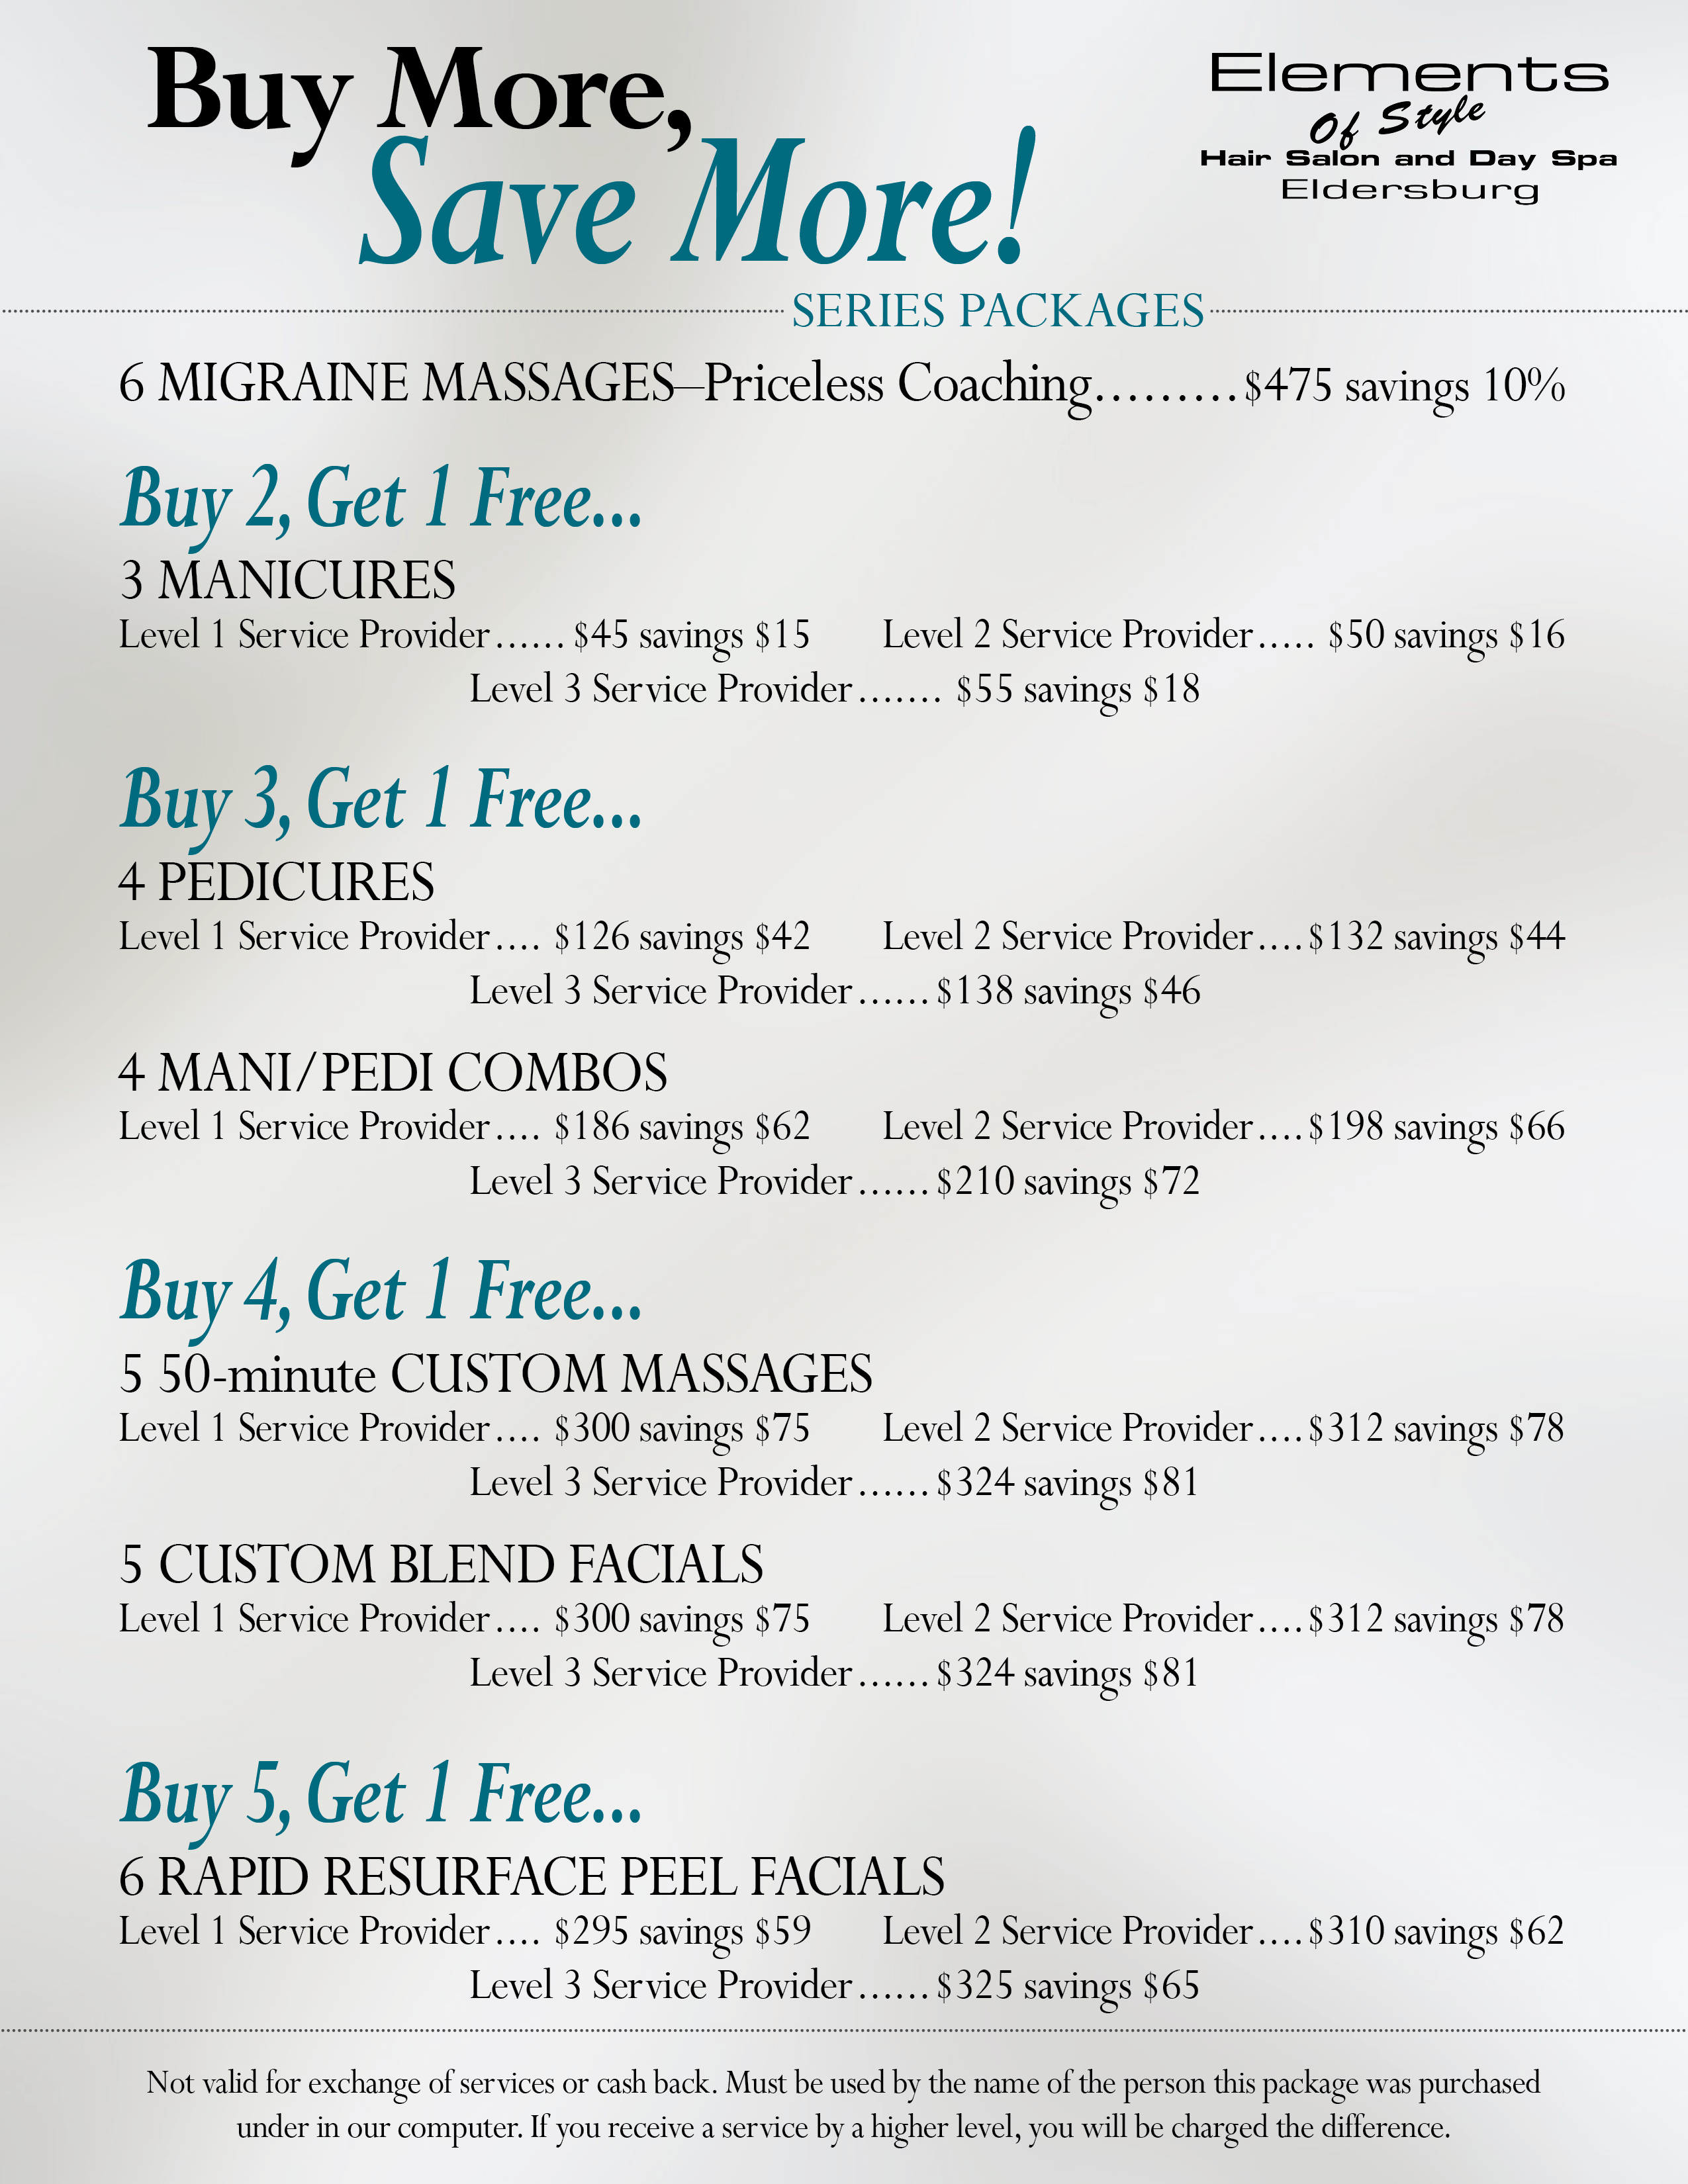 Series Packages - Elements of Style Salon